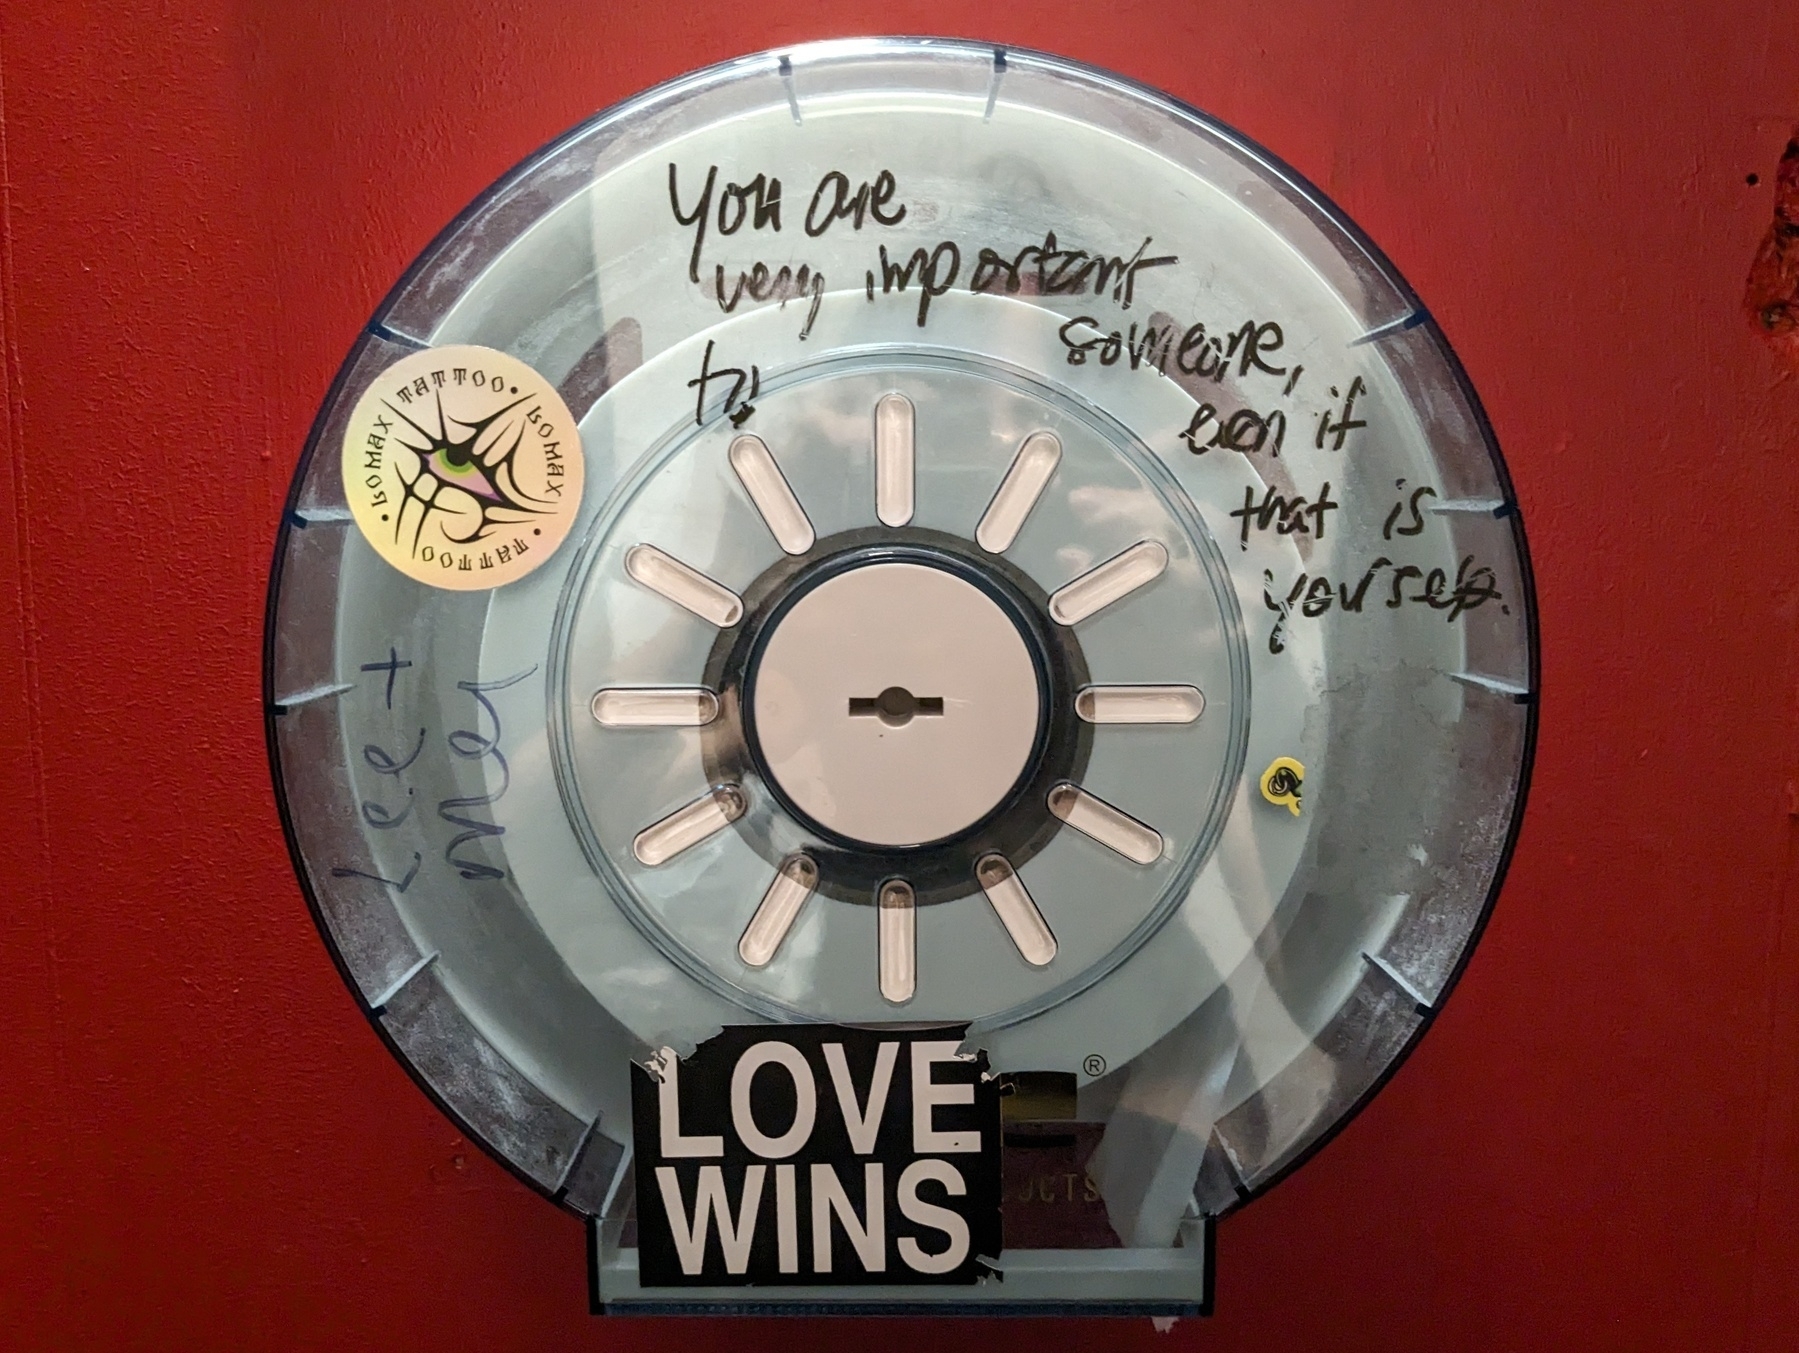 Photo of a toilet paper holder with graffiti on the back of a red door that says "you are very important to someone, even if that is yourself" and "love wins"